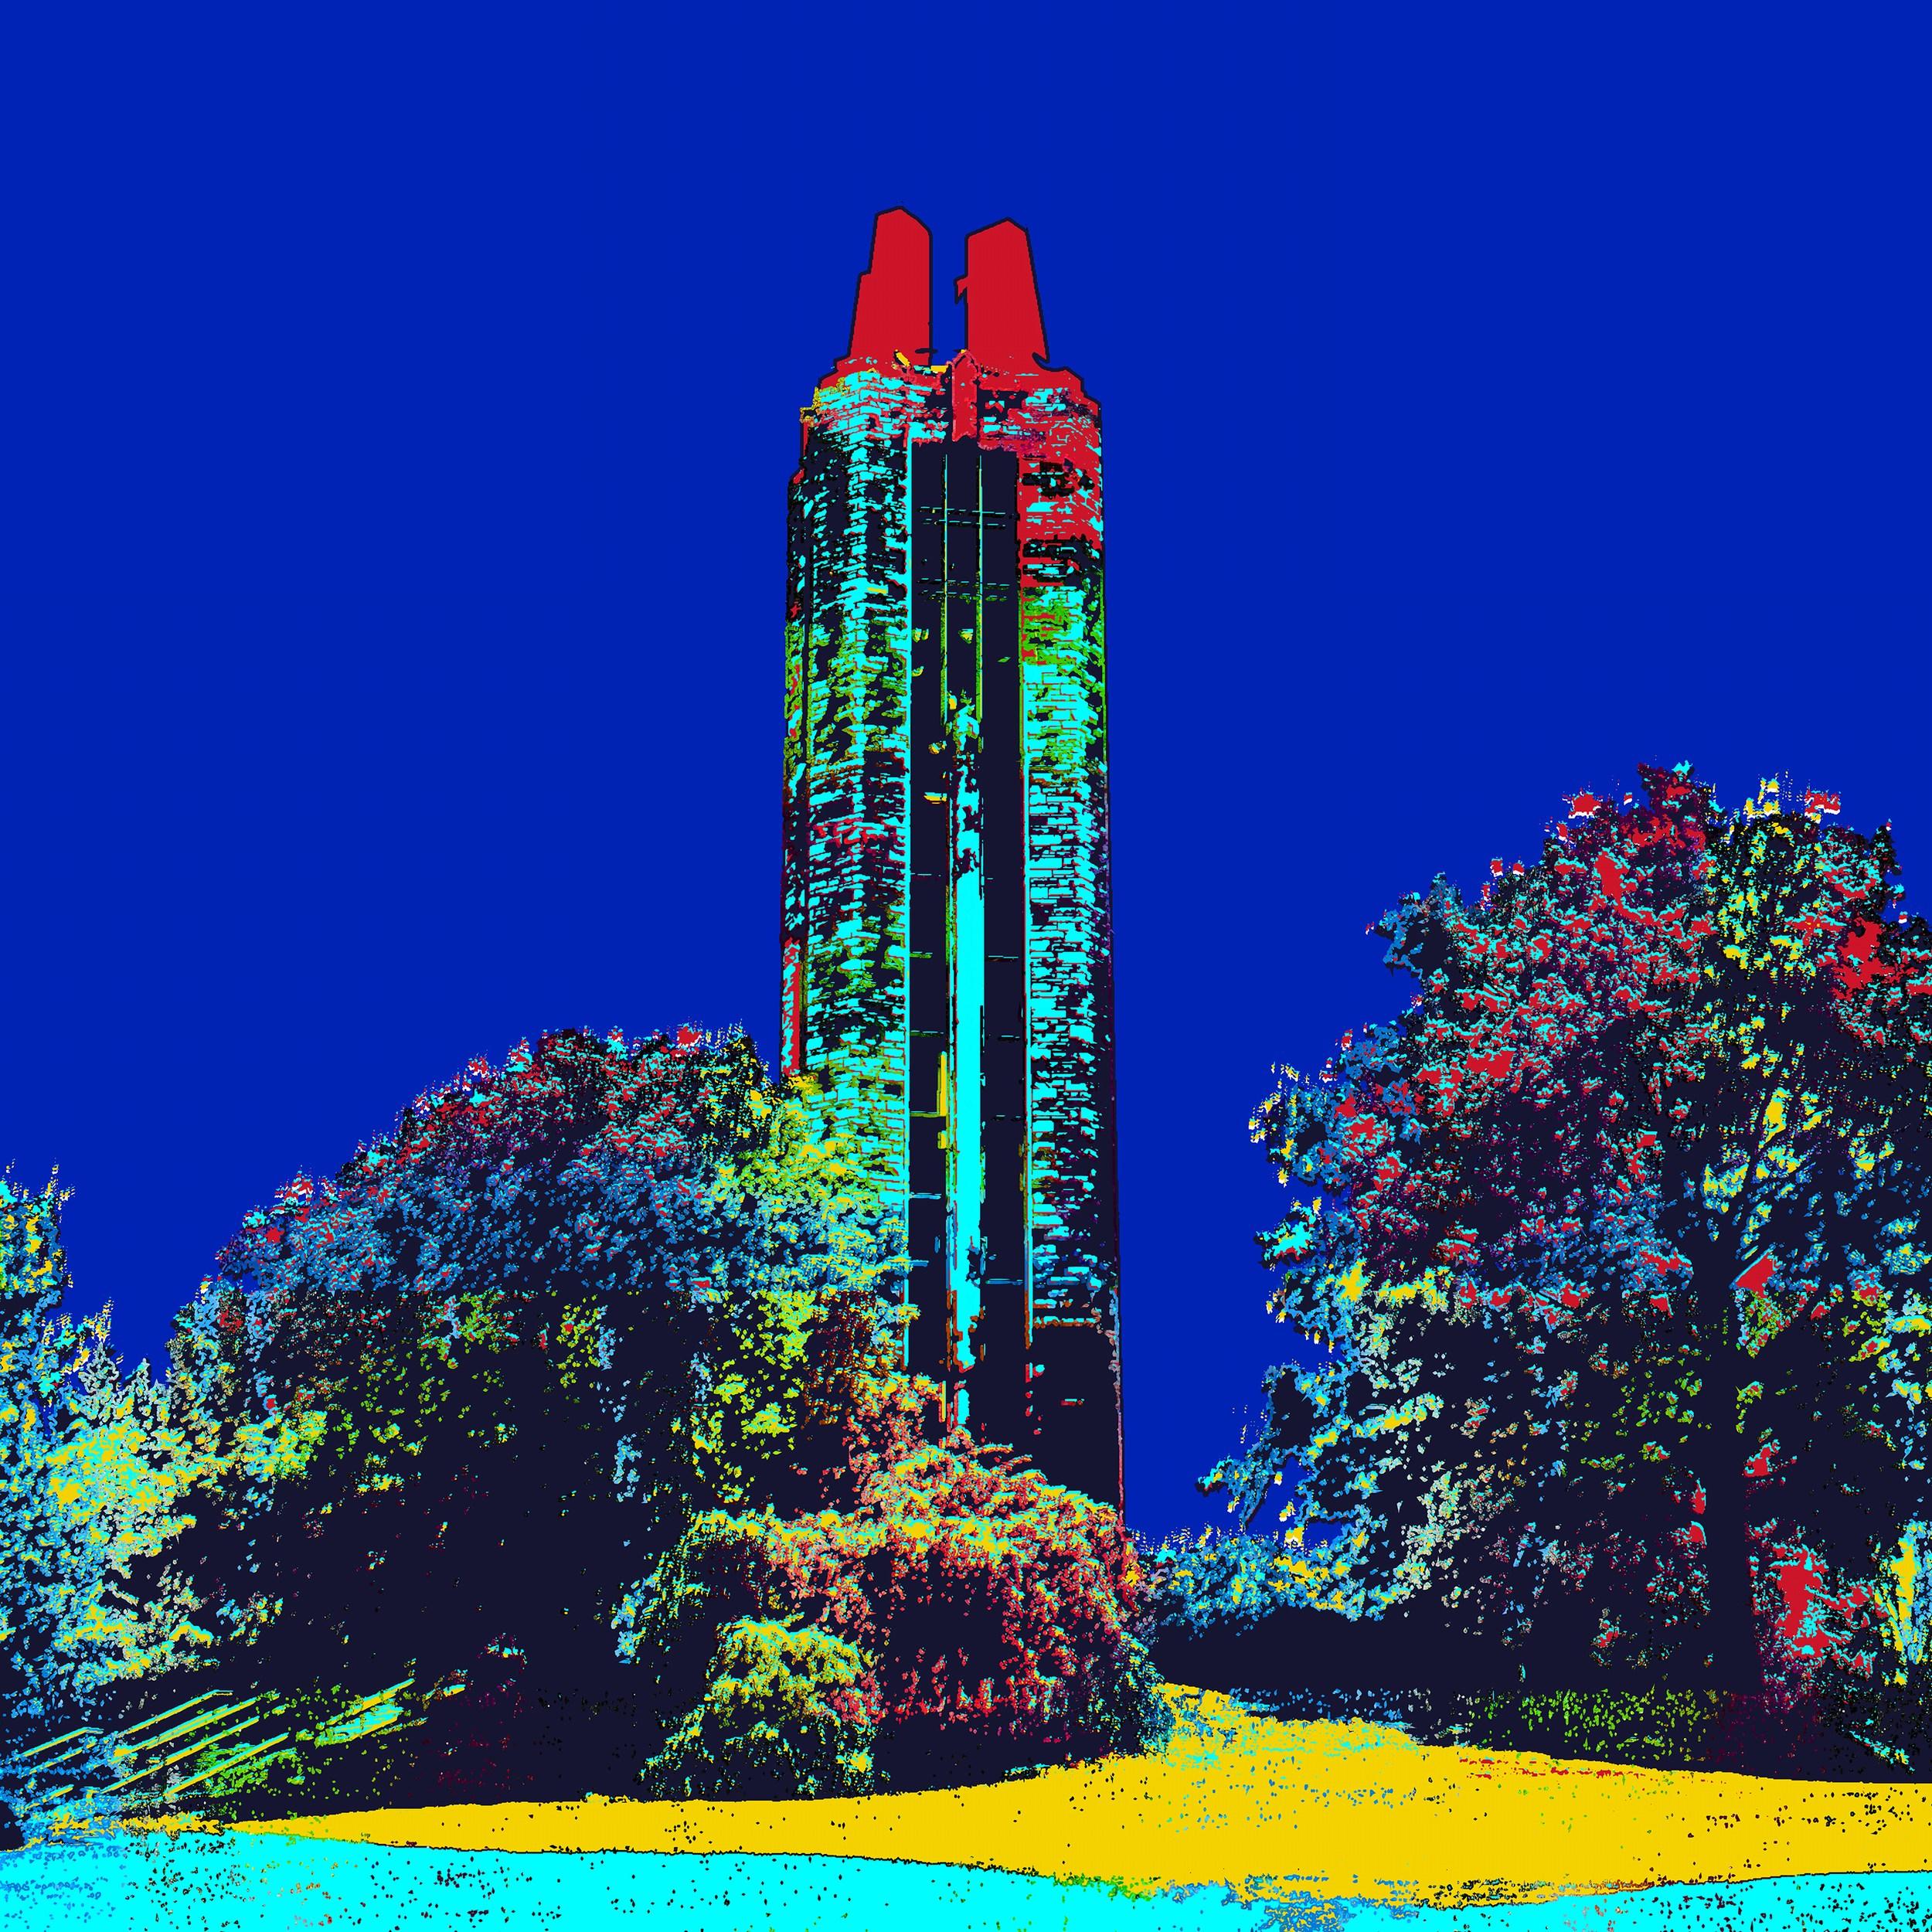 Katrina Revenaugh
“The Campanile Tower”
Dye Sublimation Print on Aluminum, 2024
Size Options: 12 x 12 inches, 20 x 20 inches or 30 x 30 inches
Edition: 75 + AP
Signed and titled on label provided separately
COA included

Tags: #ArtisticExpression